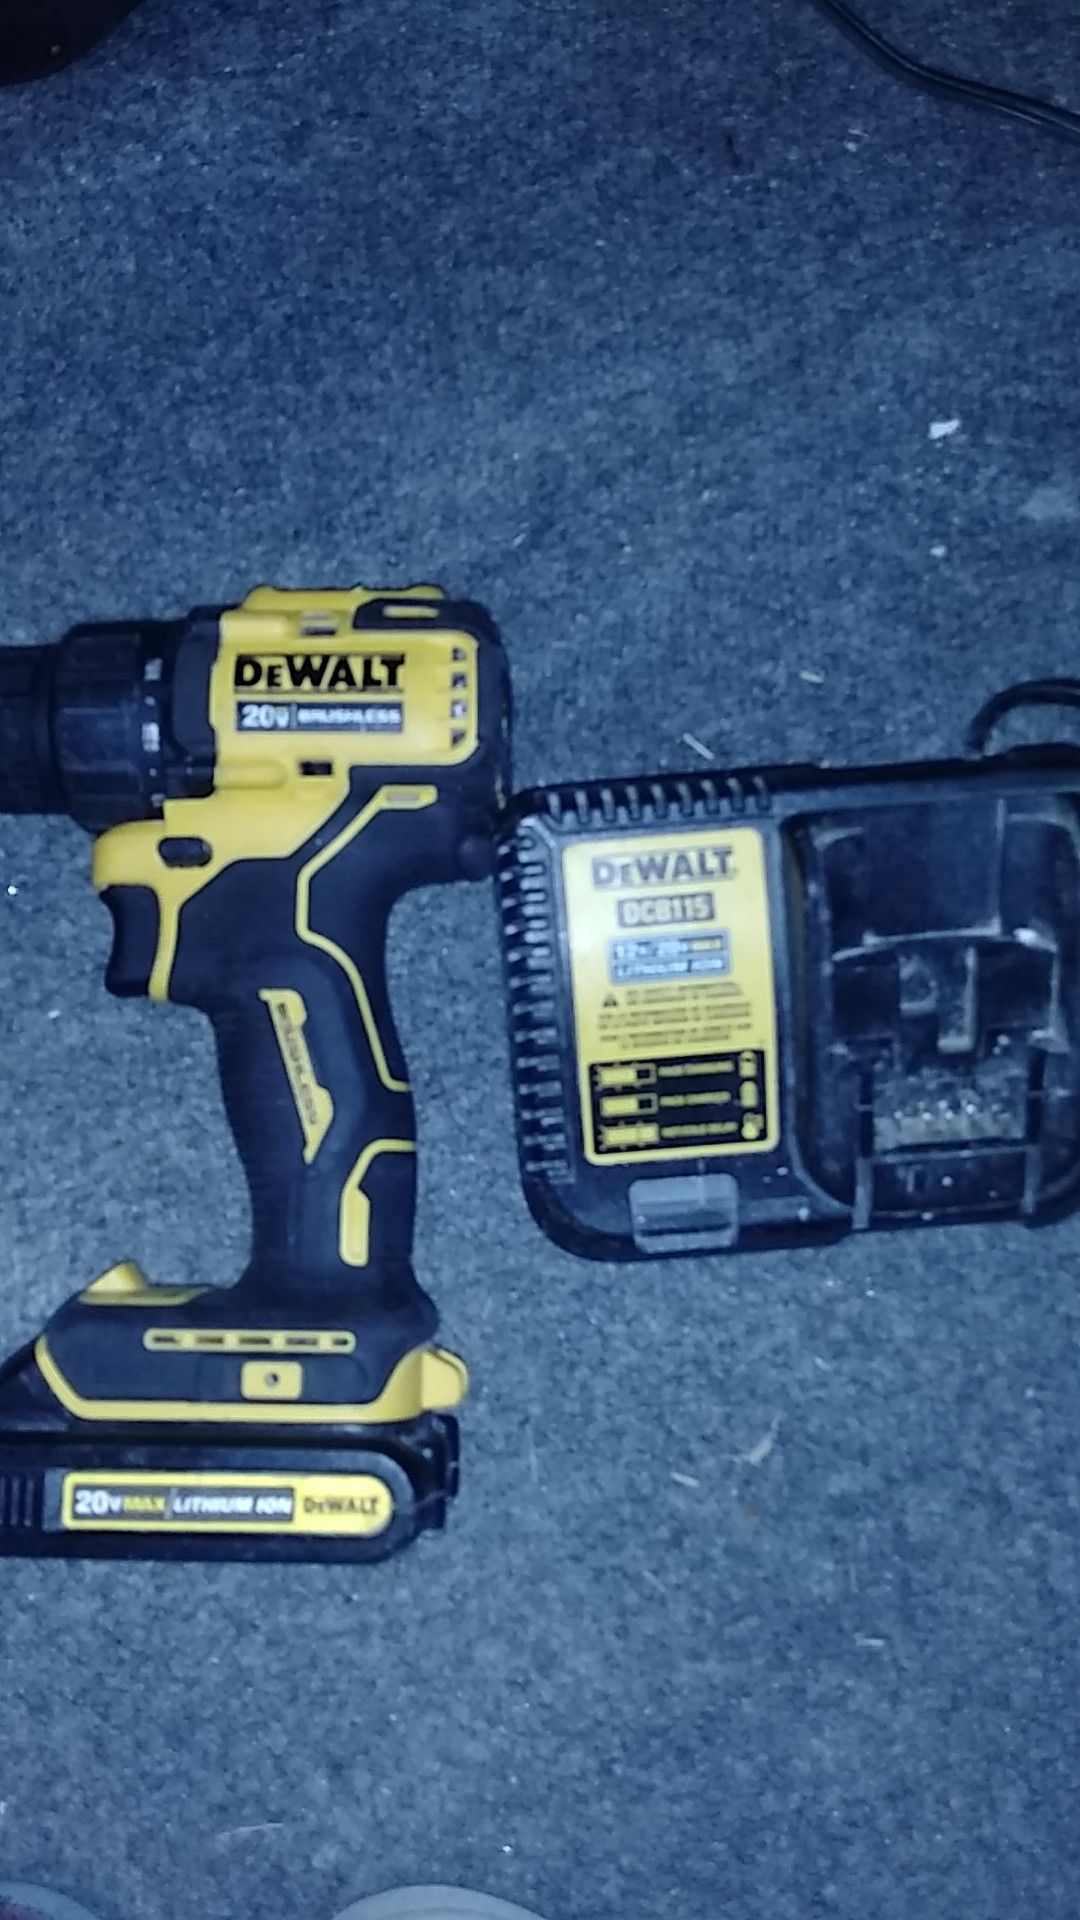 DeWalt 20 volt brushless drill when battery and charger